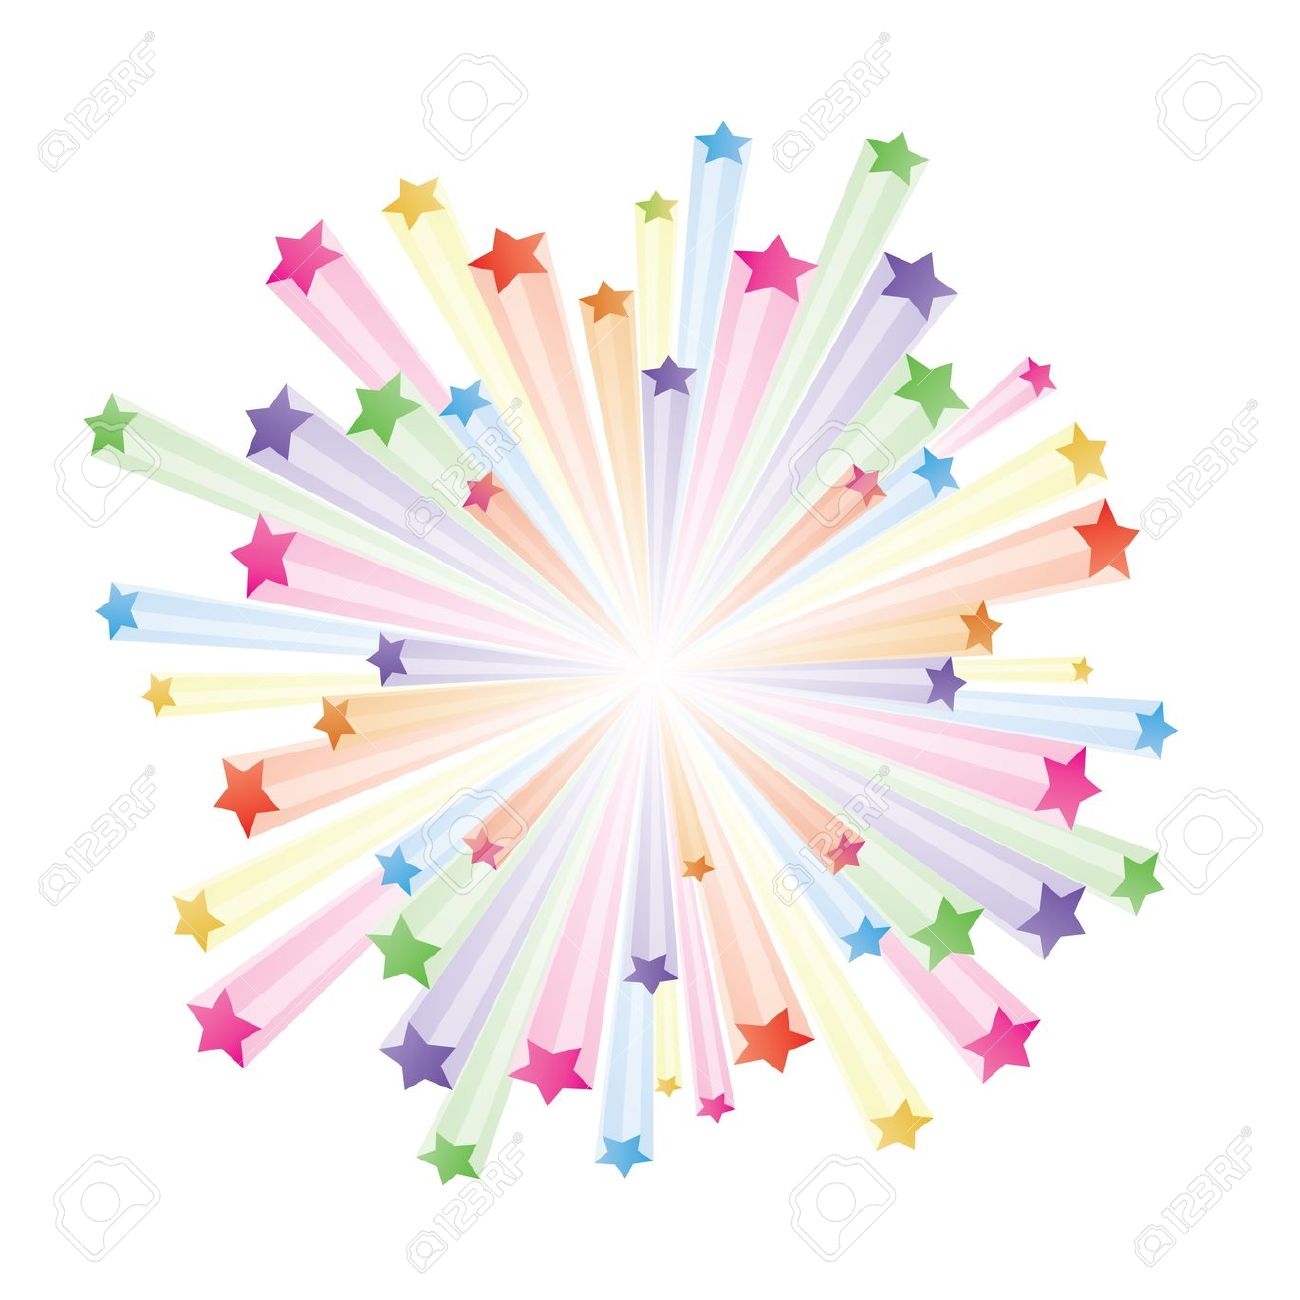 Explosion Exploding Star Hd Image Clipart